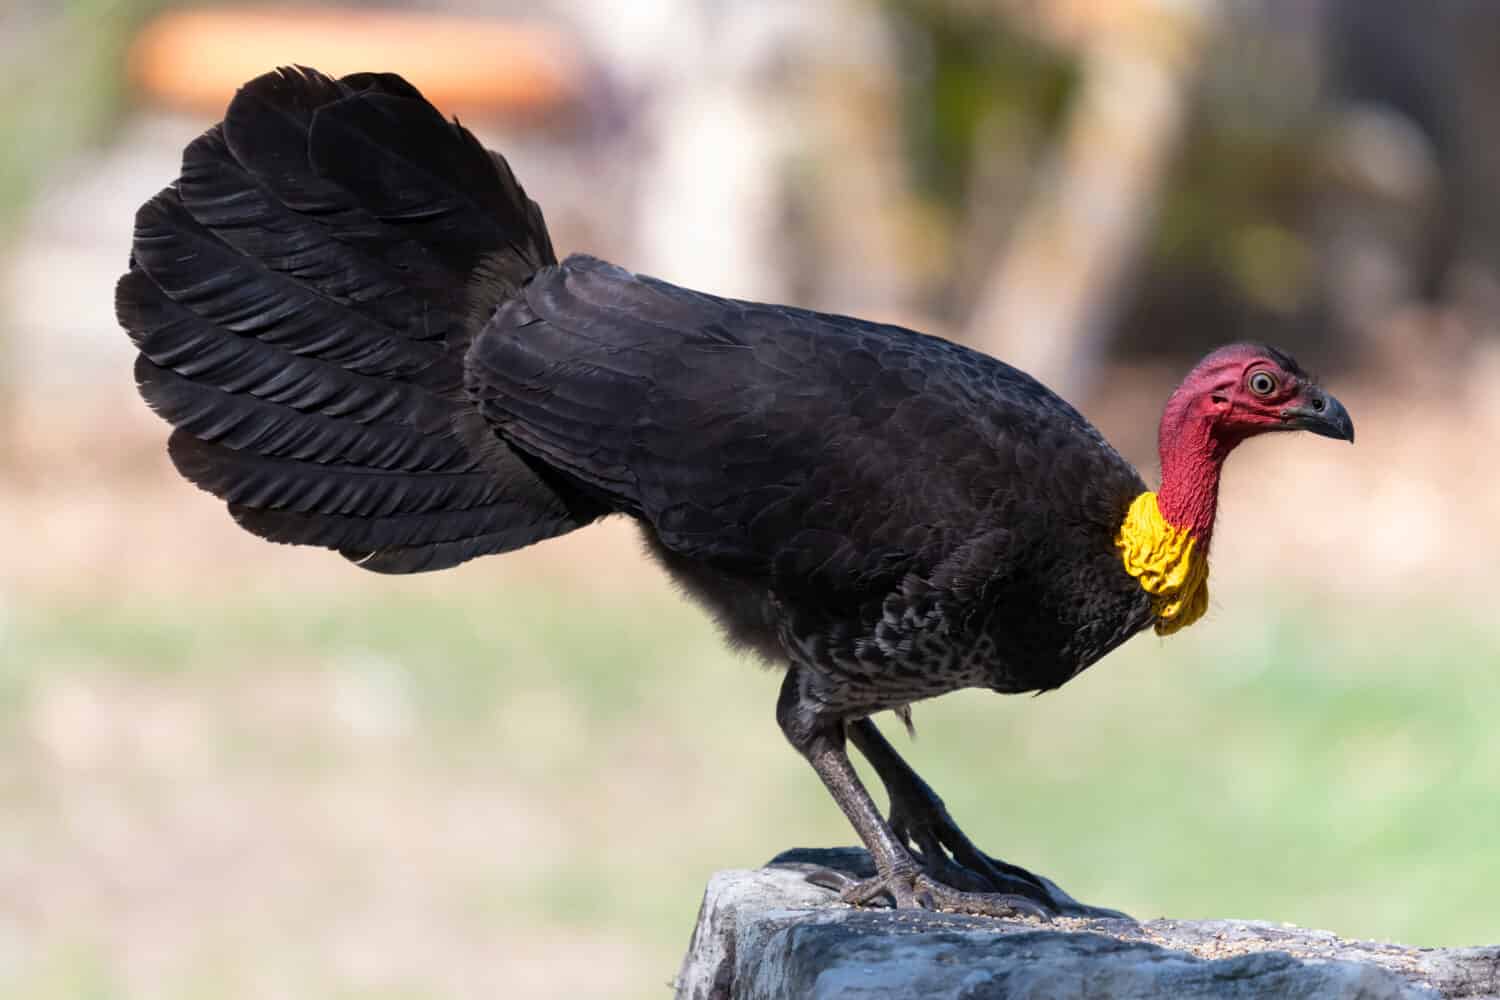 The stunning, wild Australian Brush Turkey stands at attention while enjoying some seed.